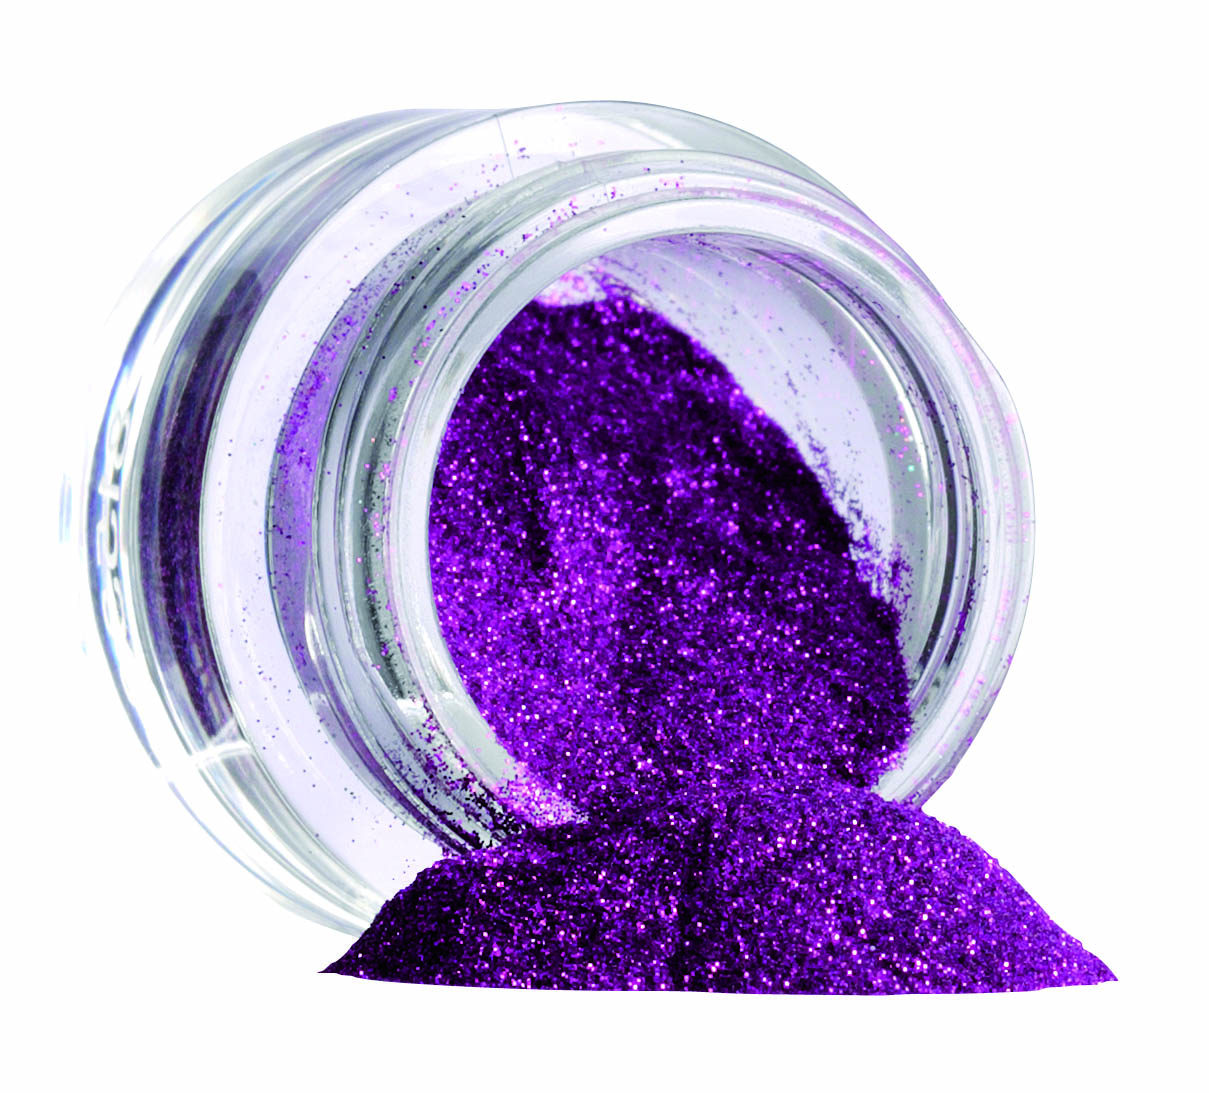 GOSH Nail Glitters £3.99, exclusively from Superdrug